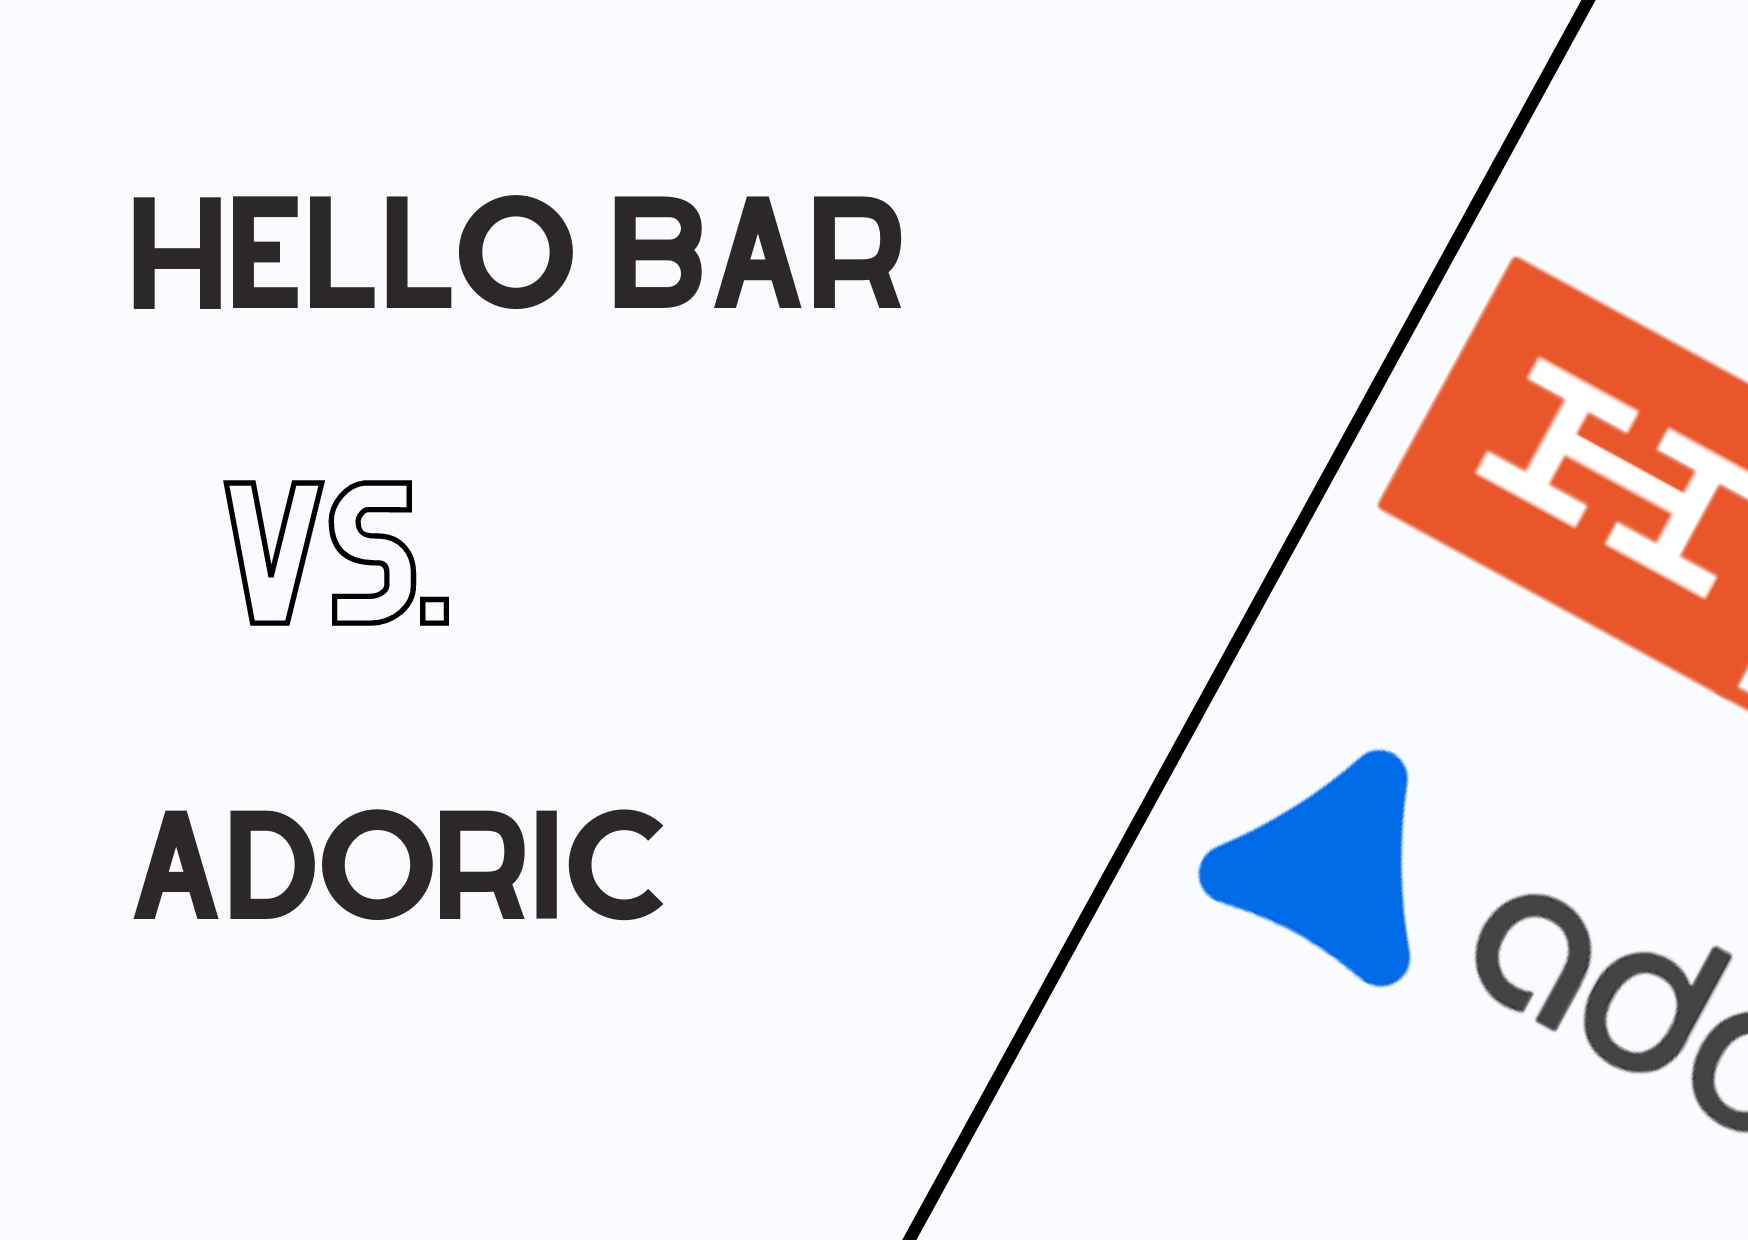 Hello Bar vs Adoric for the comparison with their names and logos